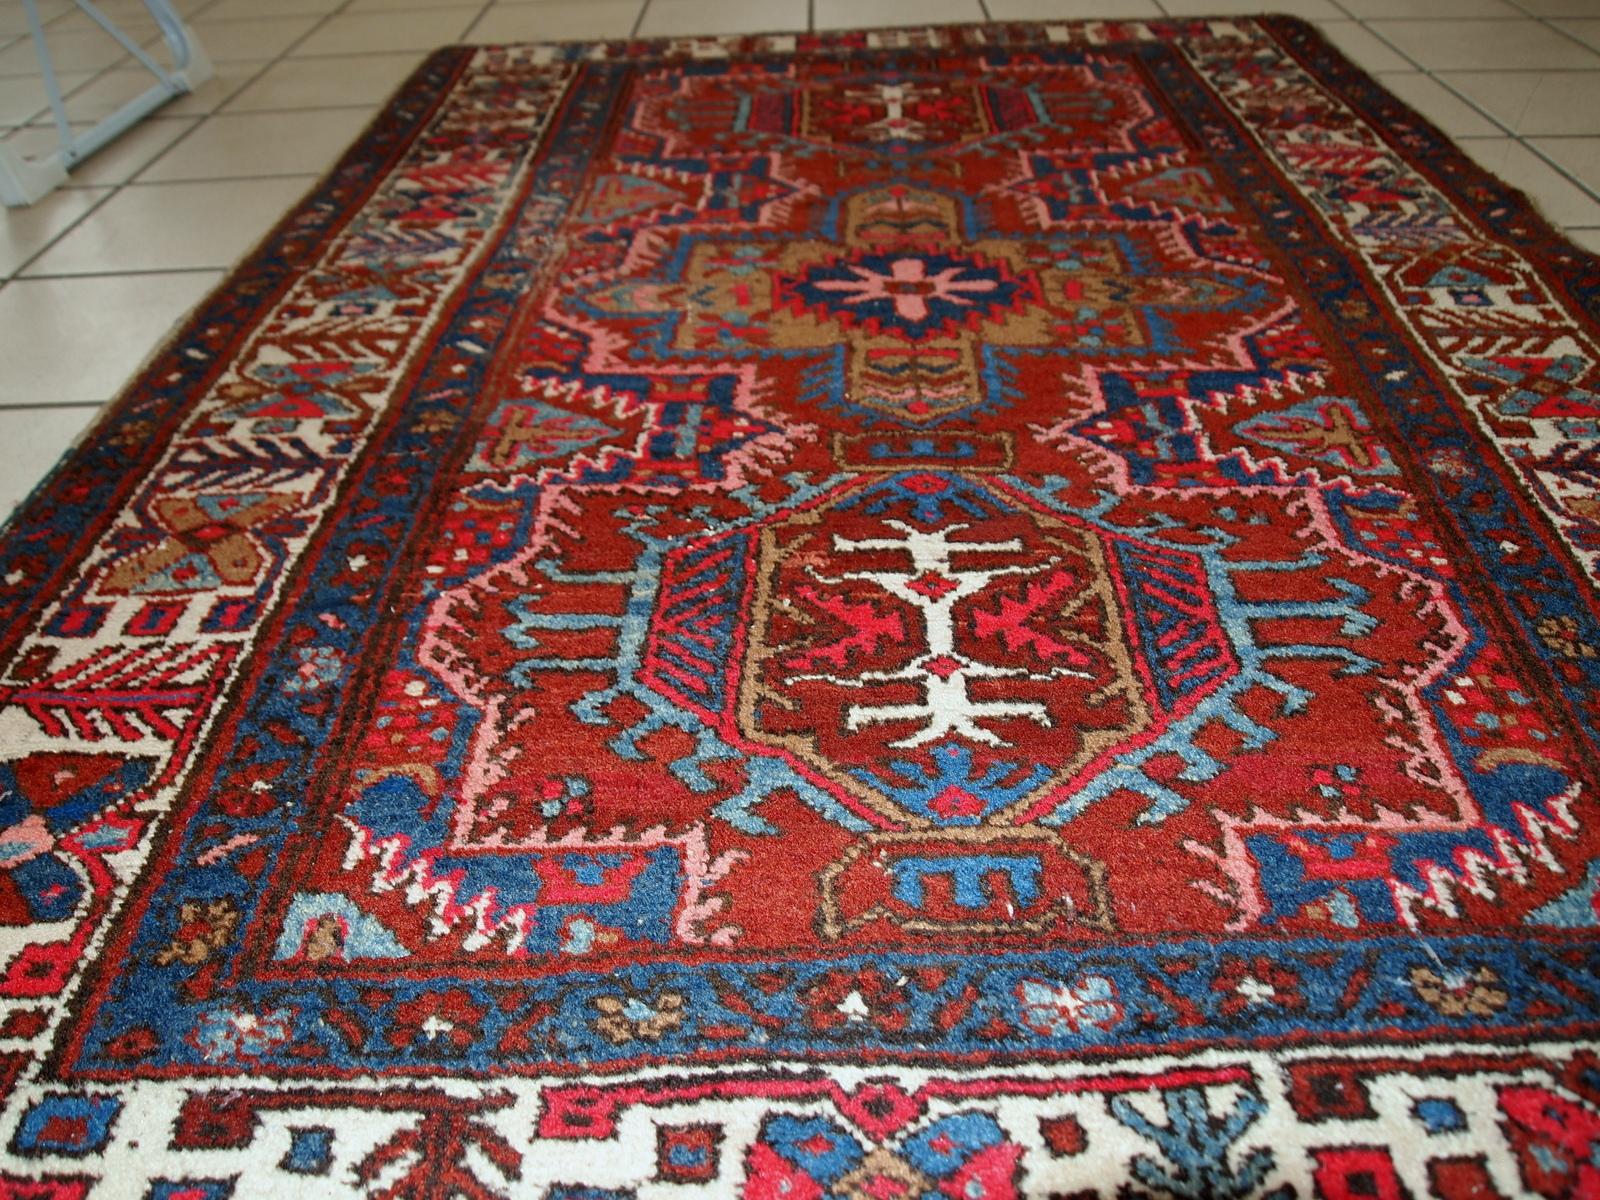 1920s style rugs